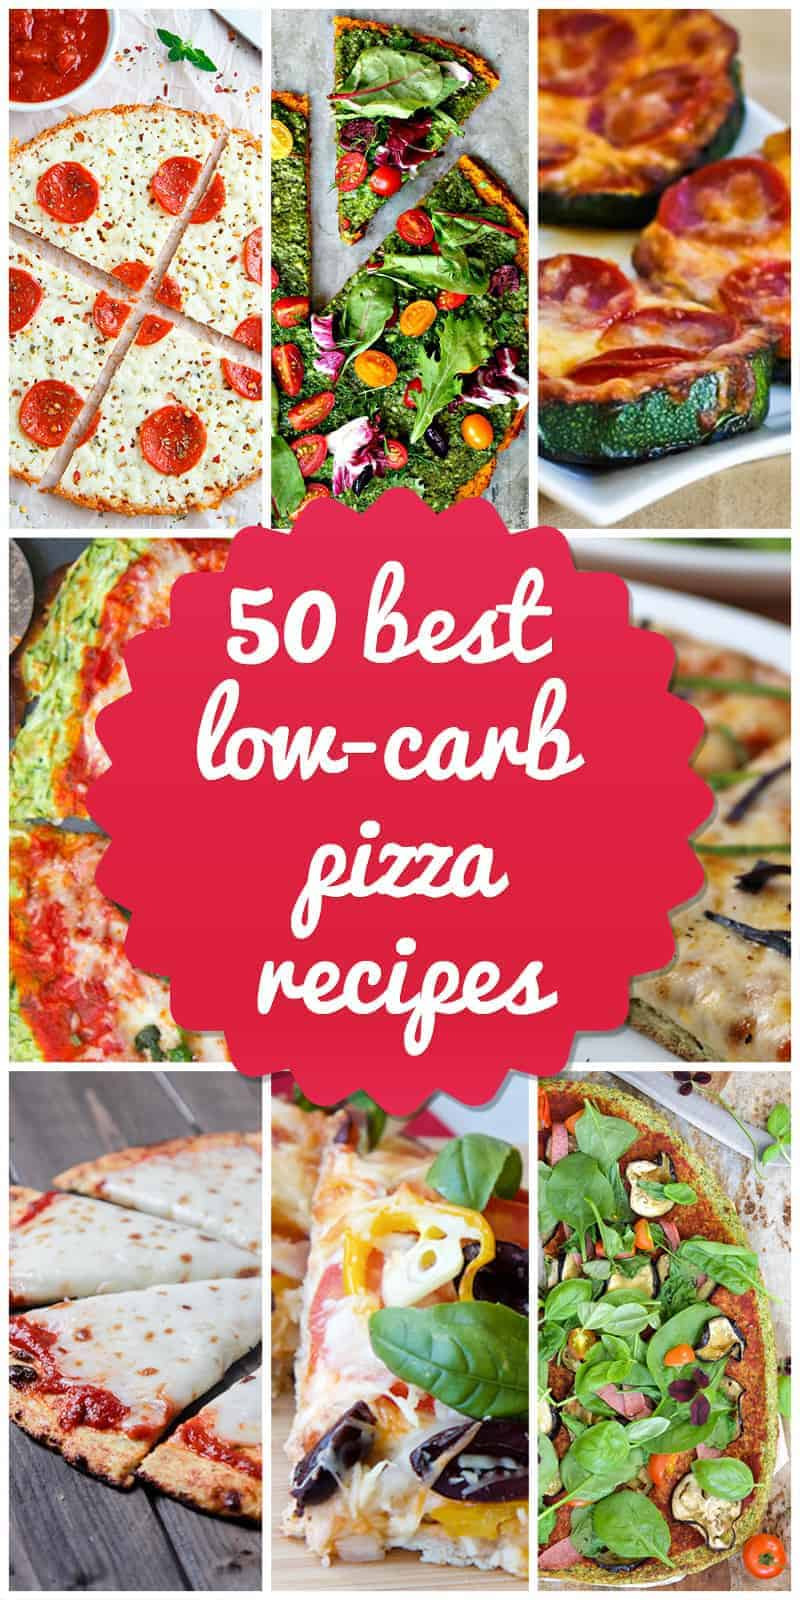 Low Carb Pizza Recipes
 50 Best Low Carb Pizza Recipes for 2018